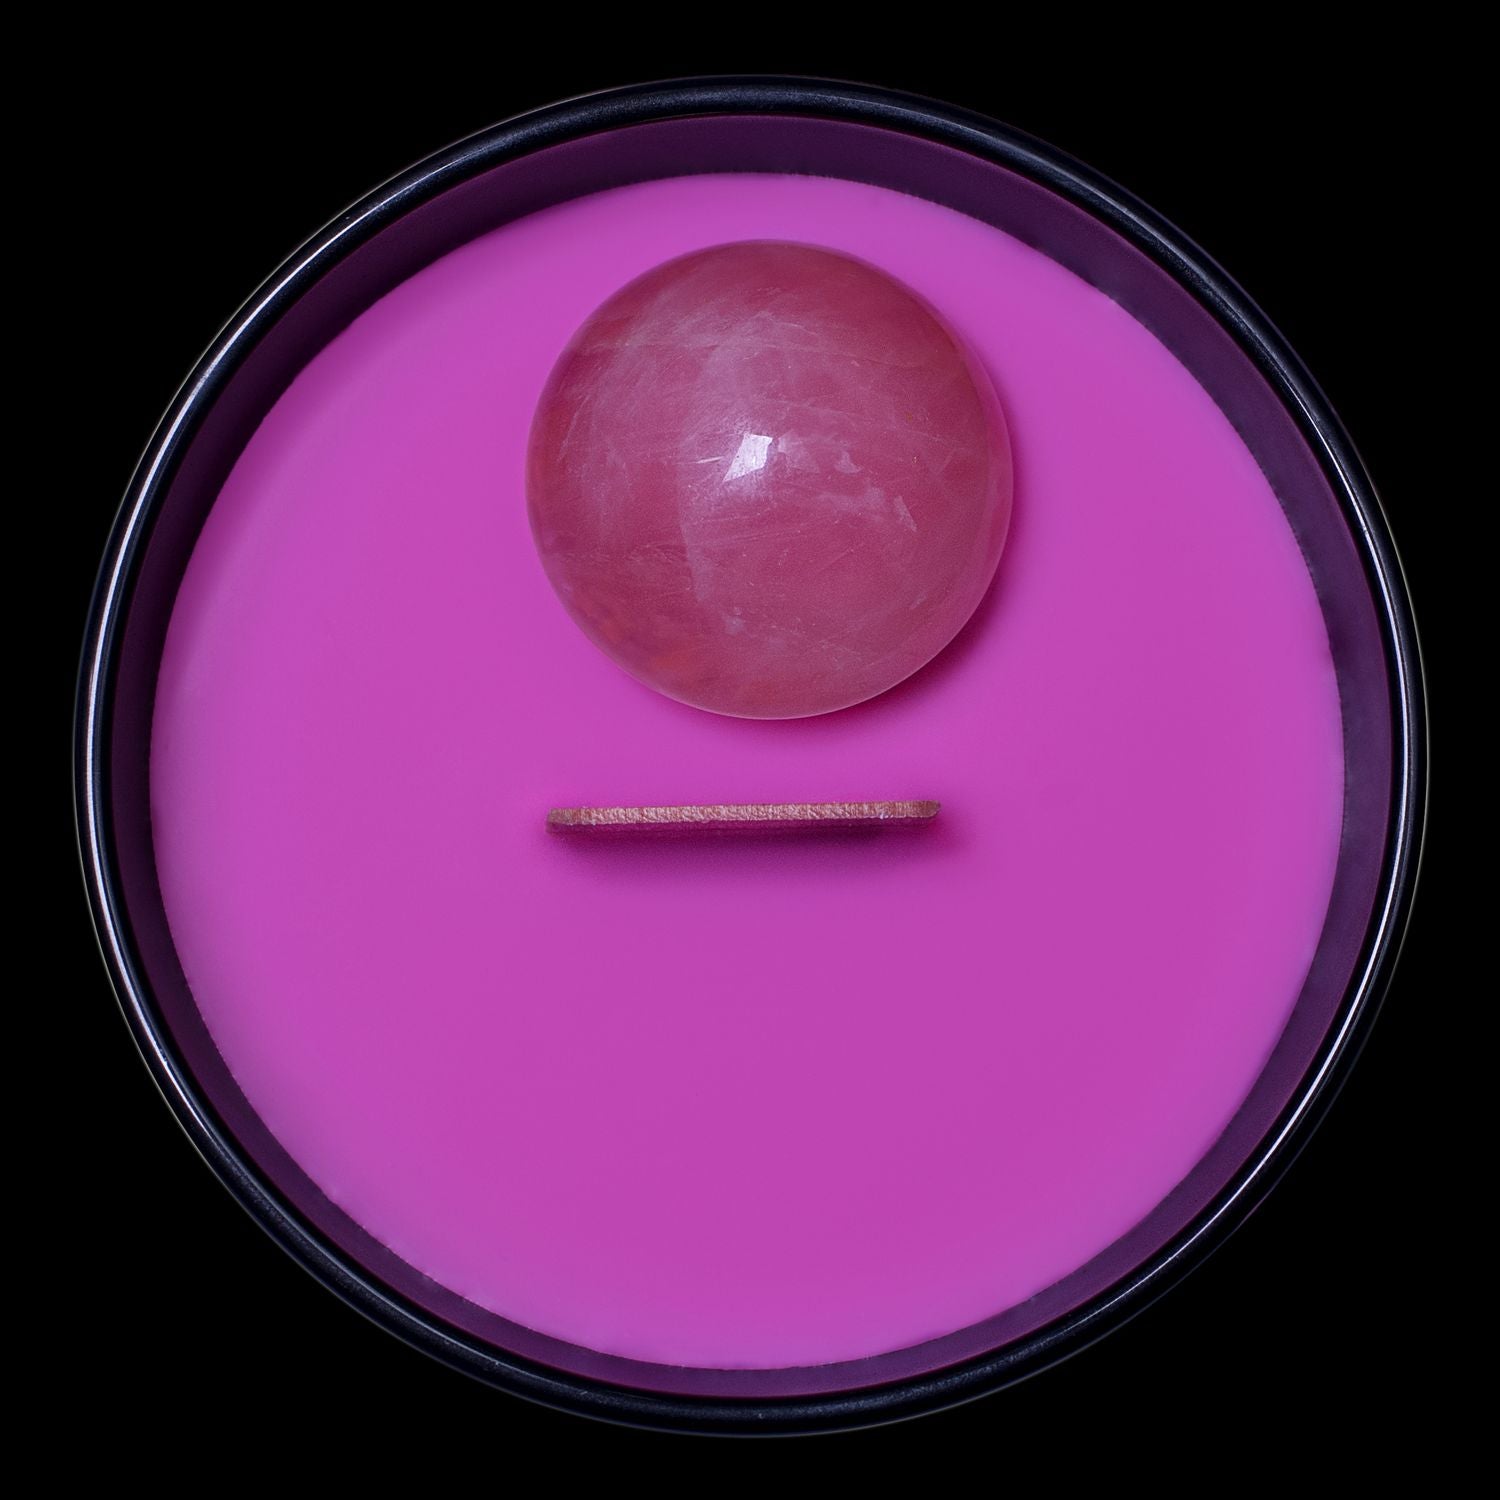 Birds Eye View Of The Naturally Wicked Hypnotwist Relax Candle Featuring Plant-based Soy Pink Wax Scented With Marsh-Mellow Magic & Includes A Rose Quartz Crystal Spinning Top & Wooden Wick